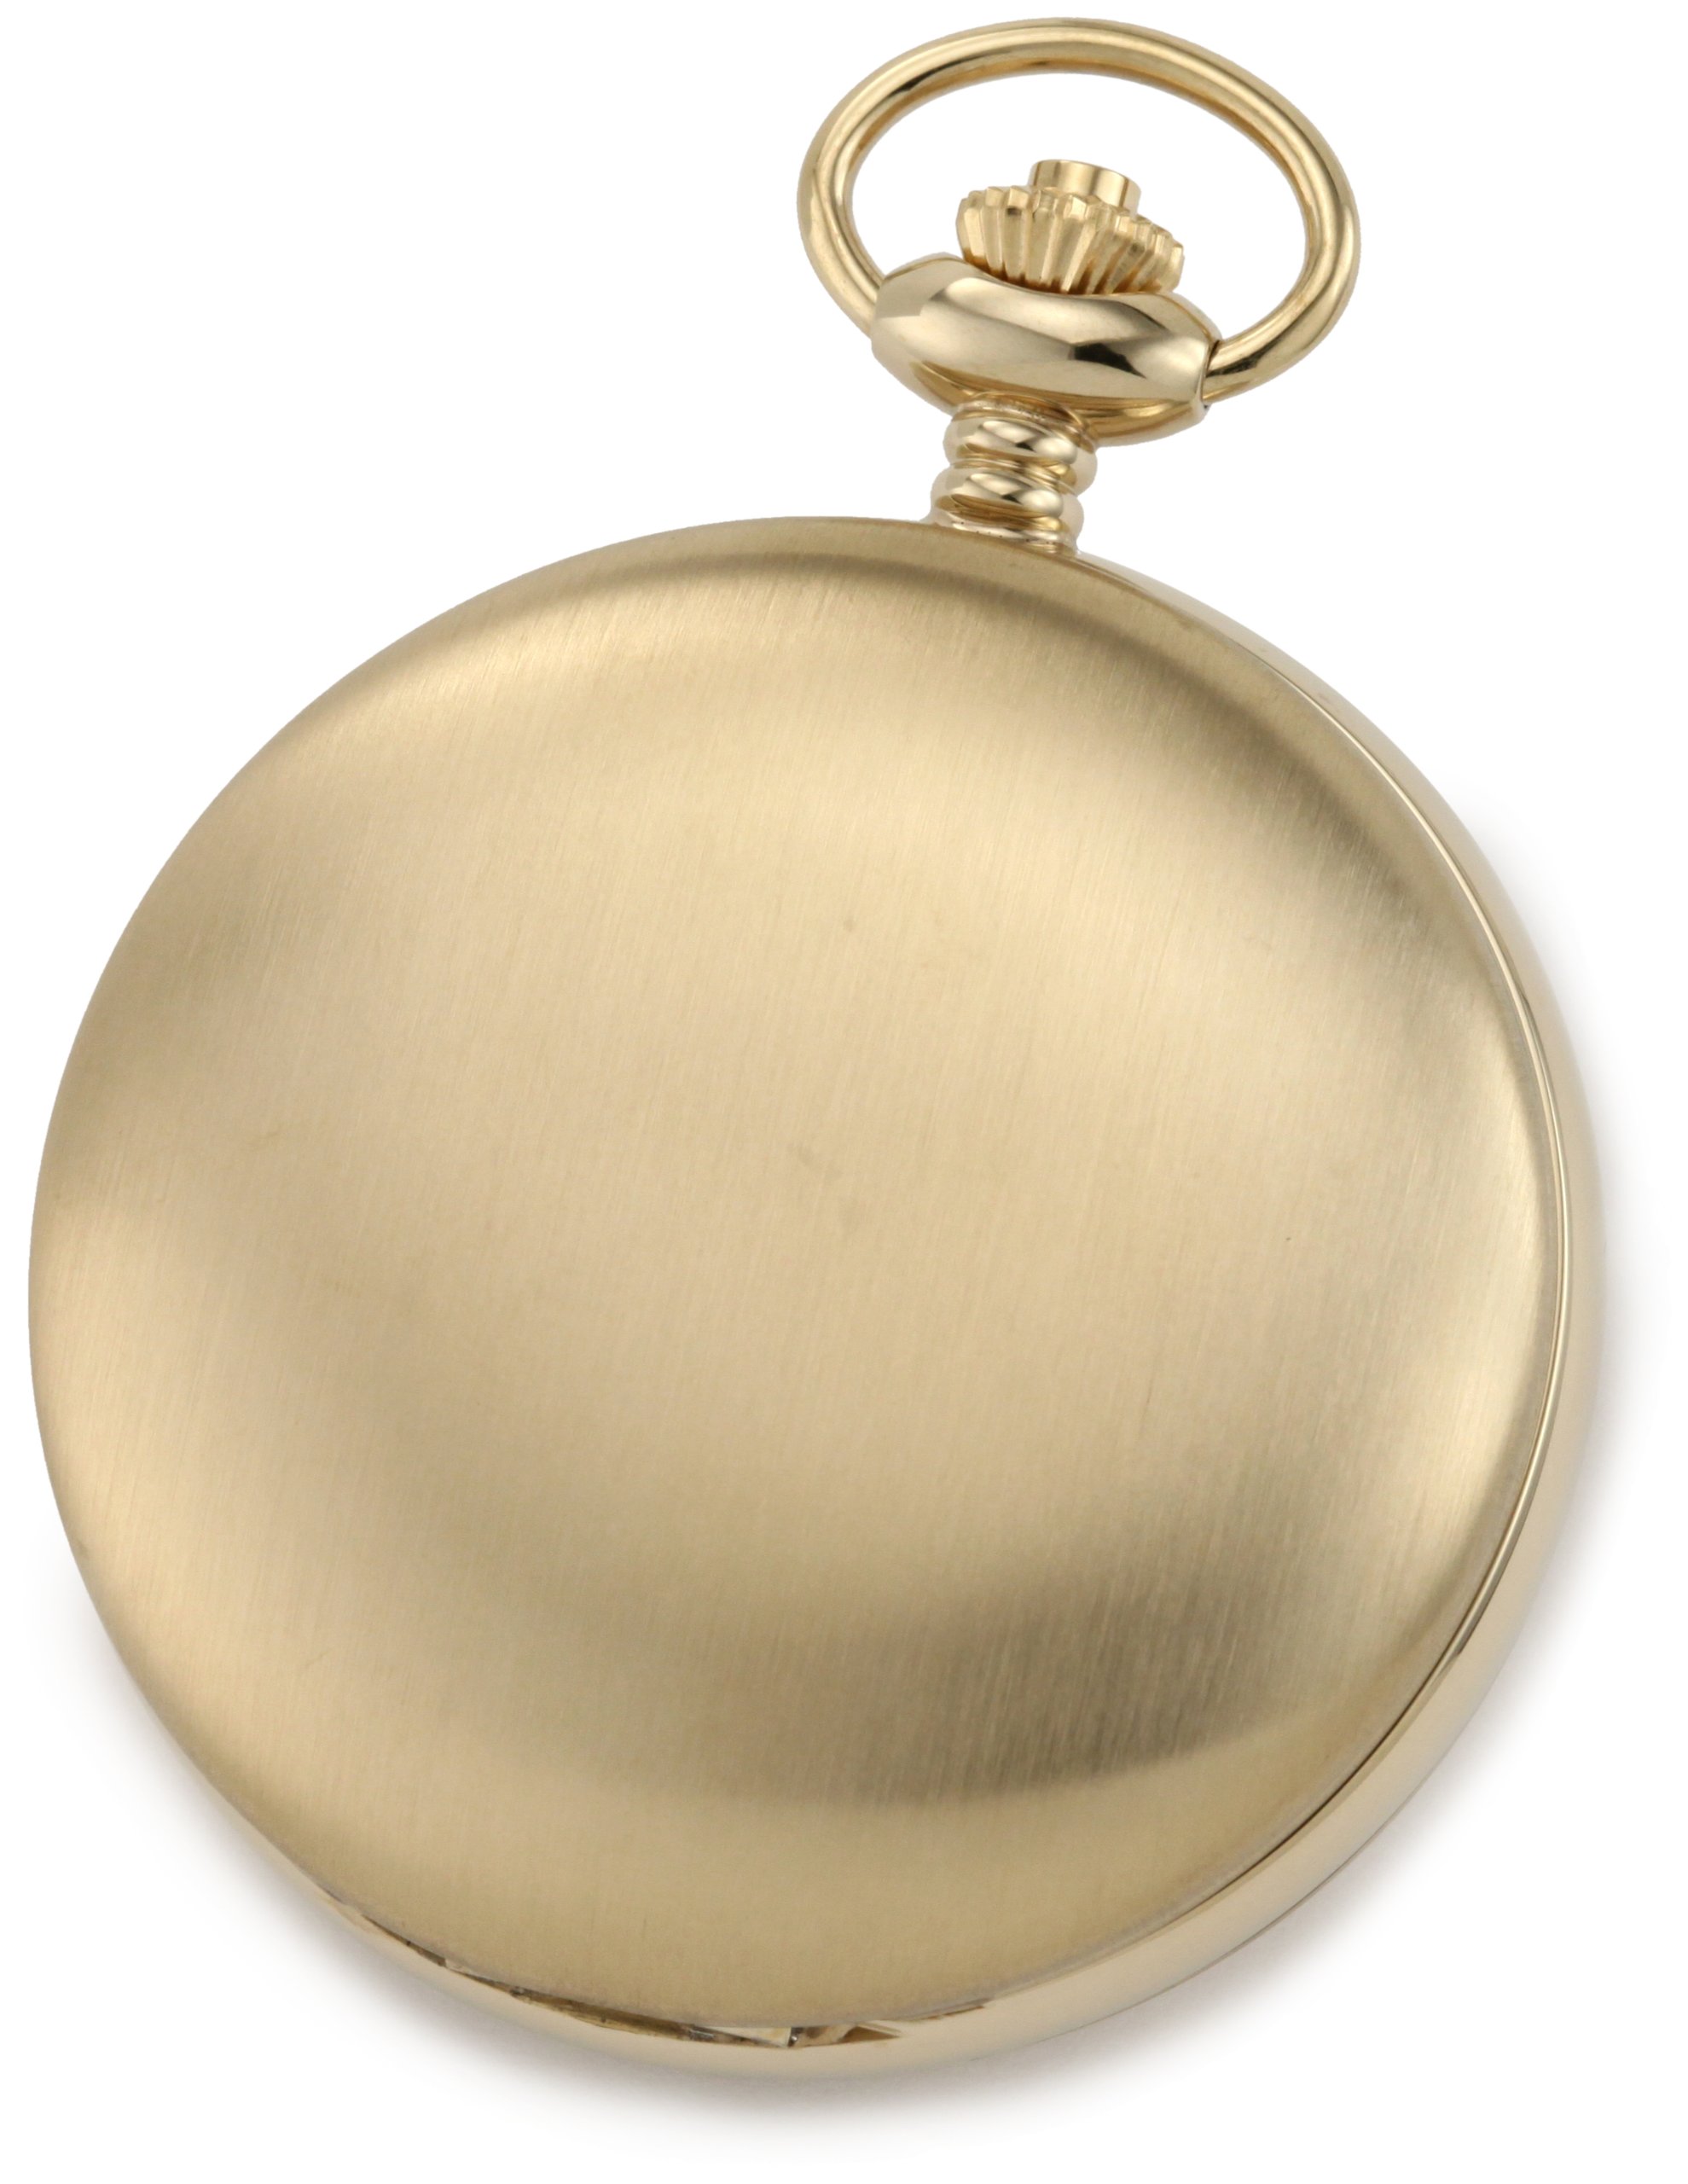 Charles-Hubert, Paris 3908-GRR Premium Collection Gold-Plated Stainless Steel Satin Finish Double Hunter Case Mechanical Pocket Watch